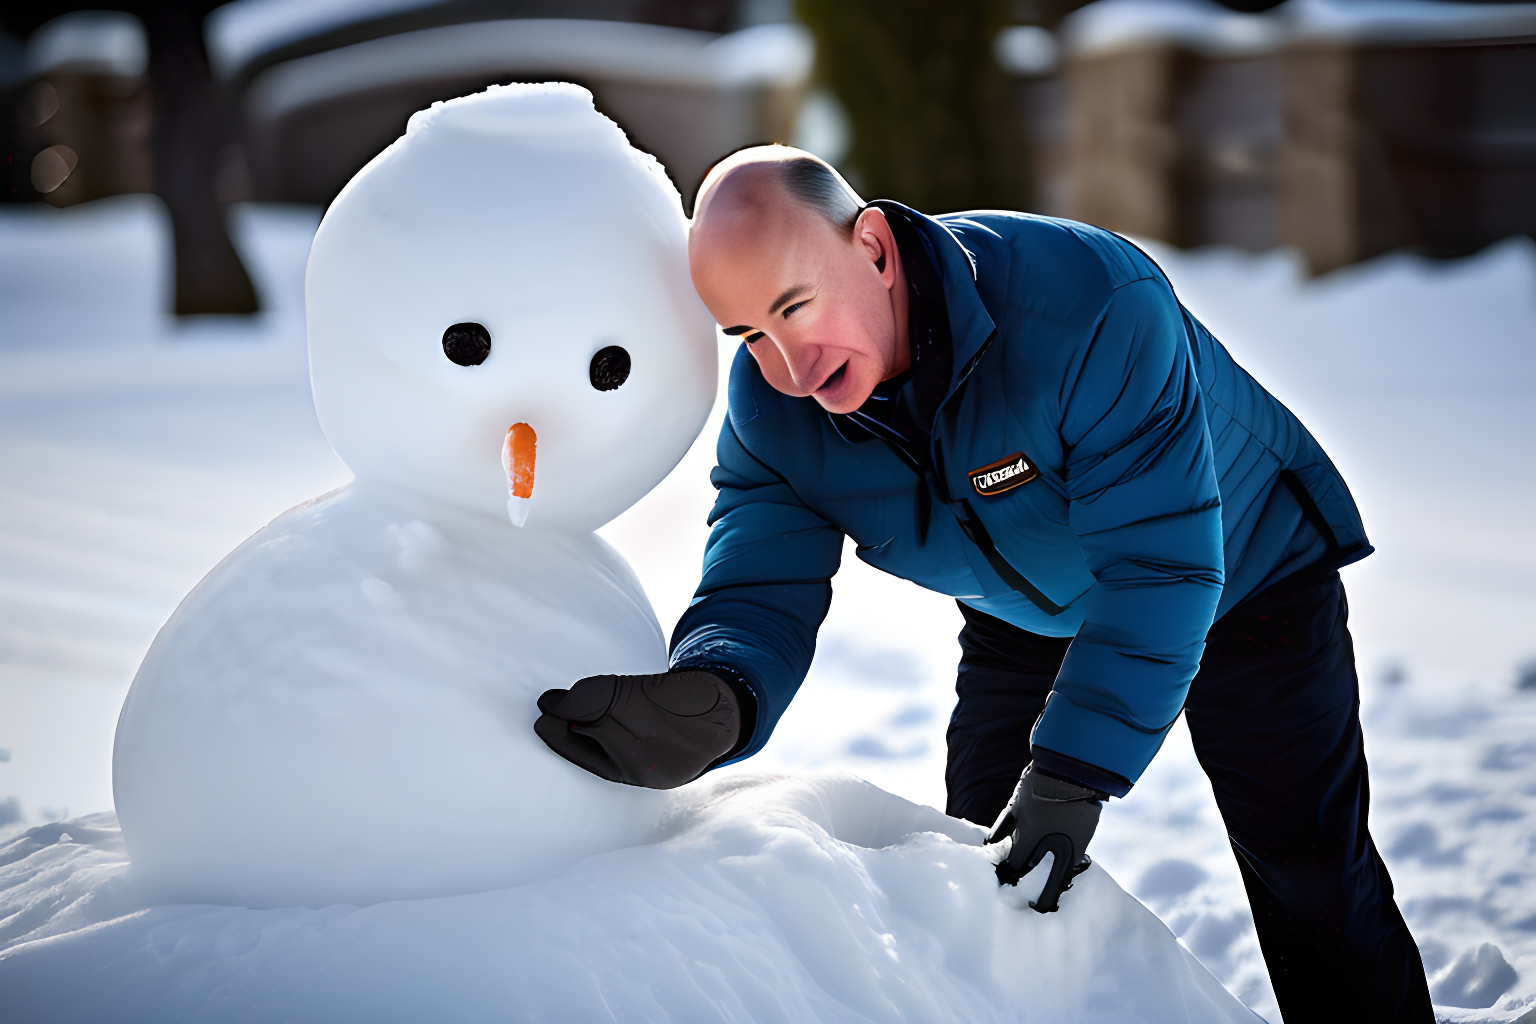 Breathtaking photograph of Jeff Bezos building a snowman. award-winning, professional, highly detailed.